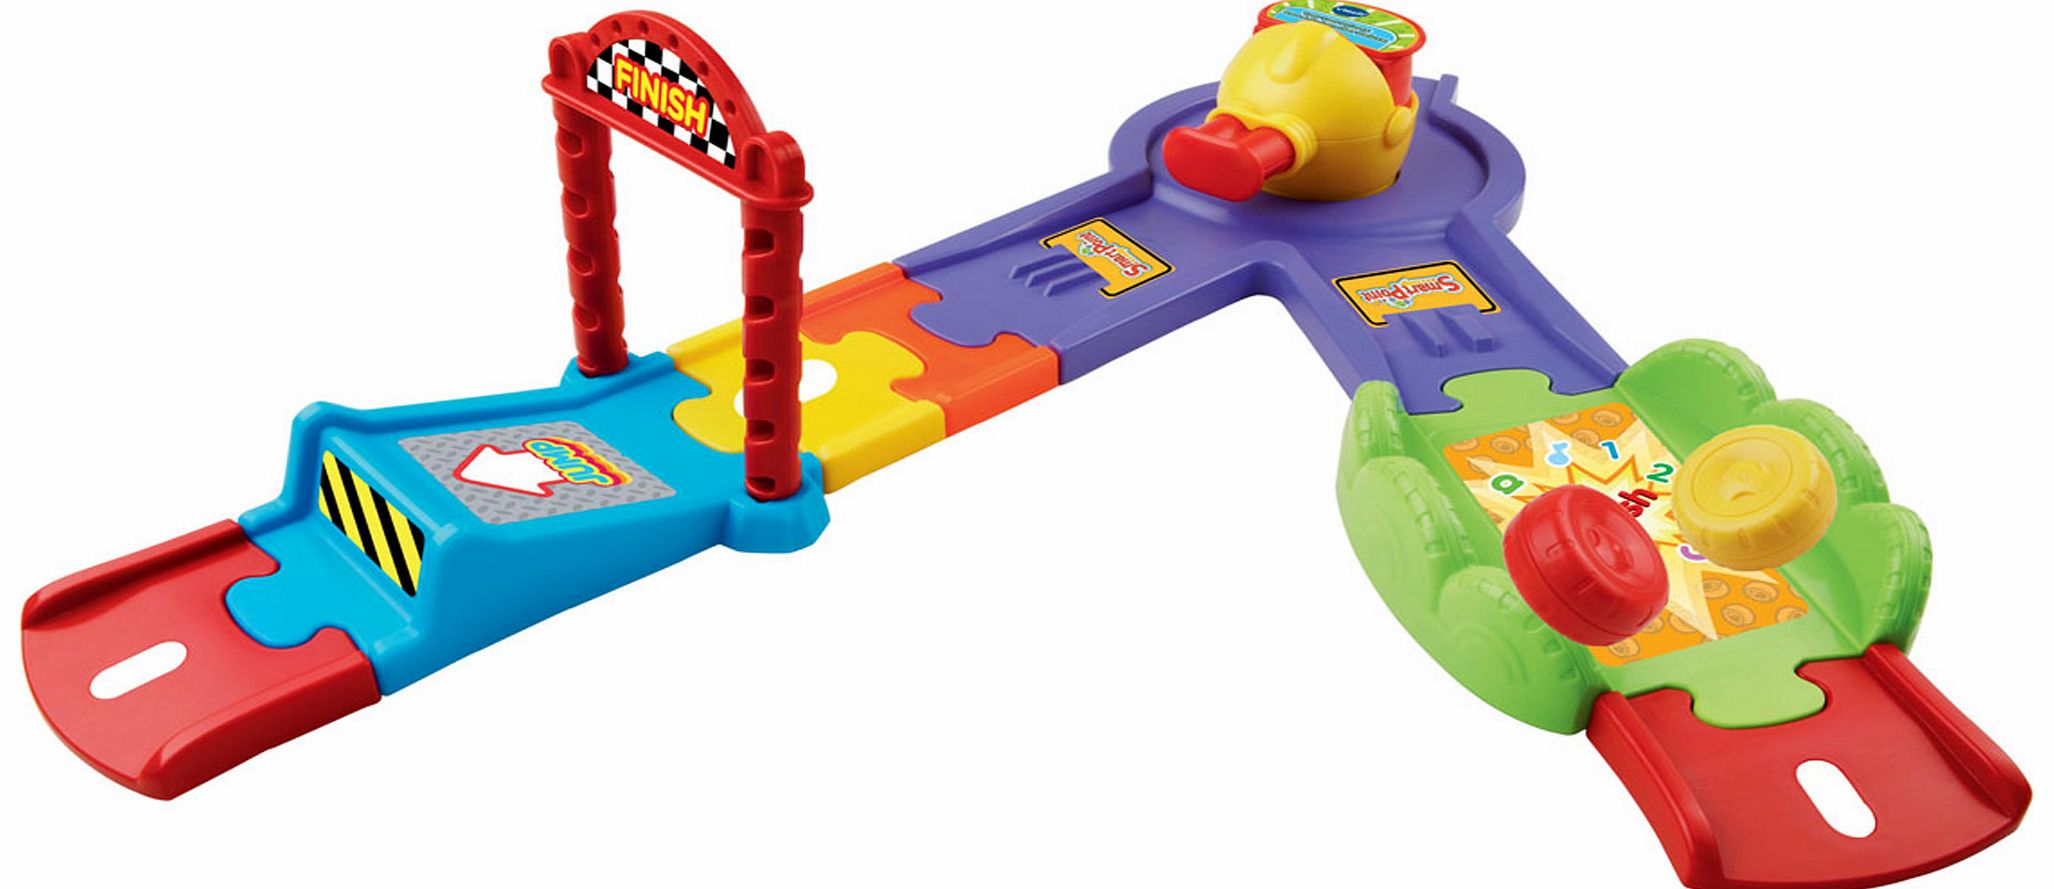 Toot-Toot Drivers Deluxe Jump Track Launcher